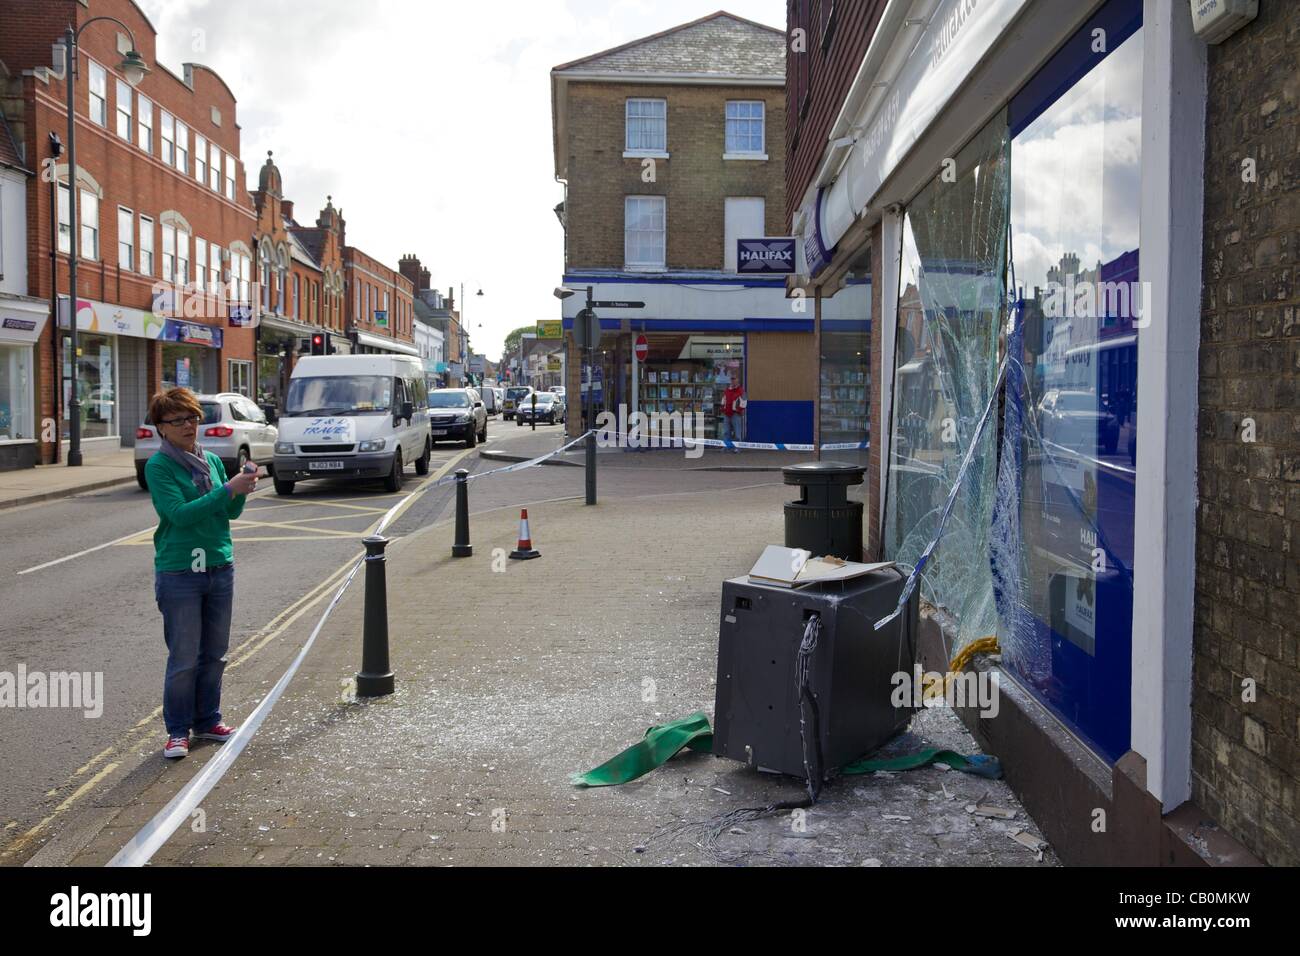 A branch of the Halifax bank, after an attempted Ram Raid robbery, Biggleswade, England Stock Photo